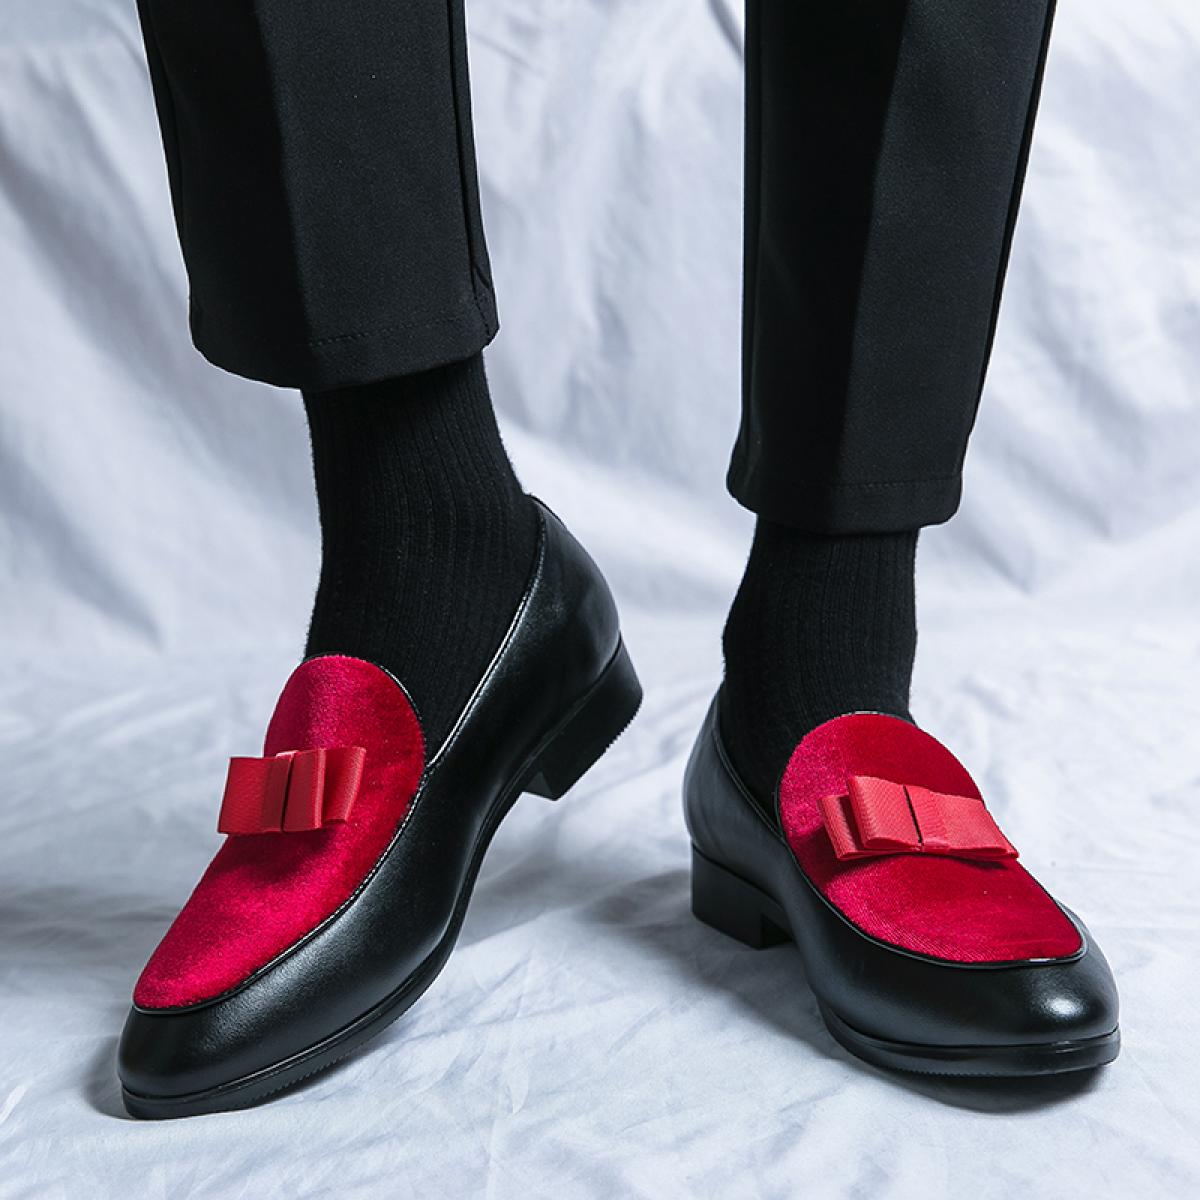 New Black Loafers Shoes For Men Low Heel Round Toe Slip On Red Business Mens Formal Shoes Size 38 48 Free Shipping Men S